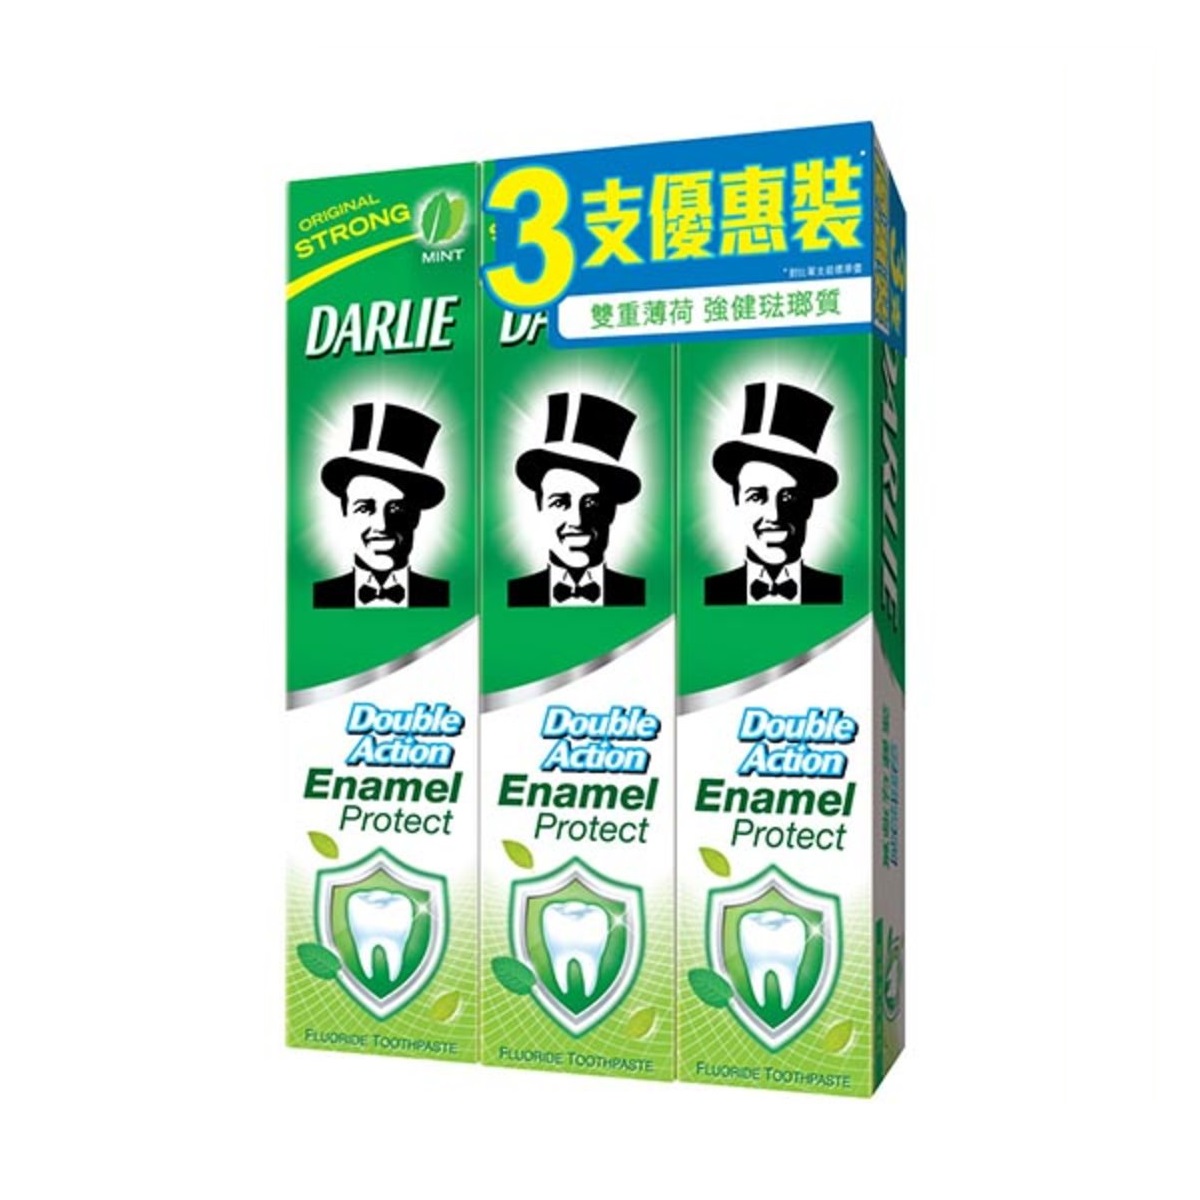 Darlie - Double Action Enamel Protect 3 x 200g